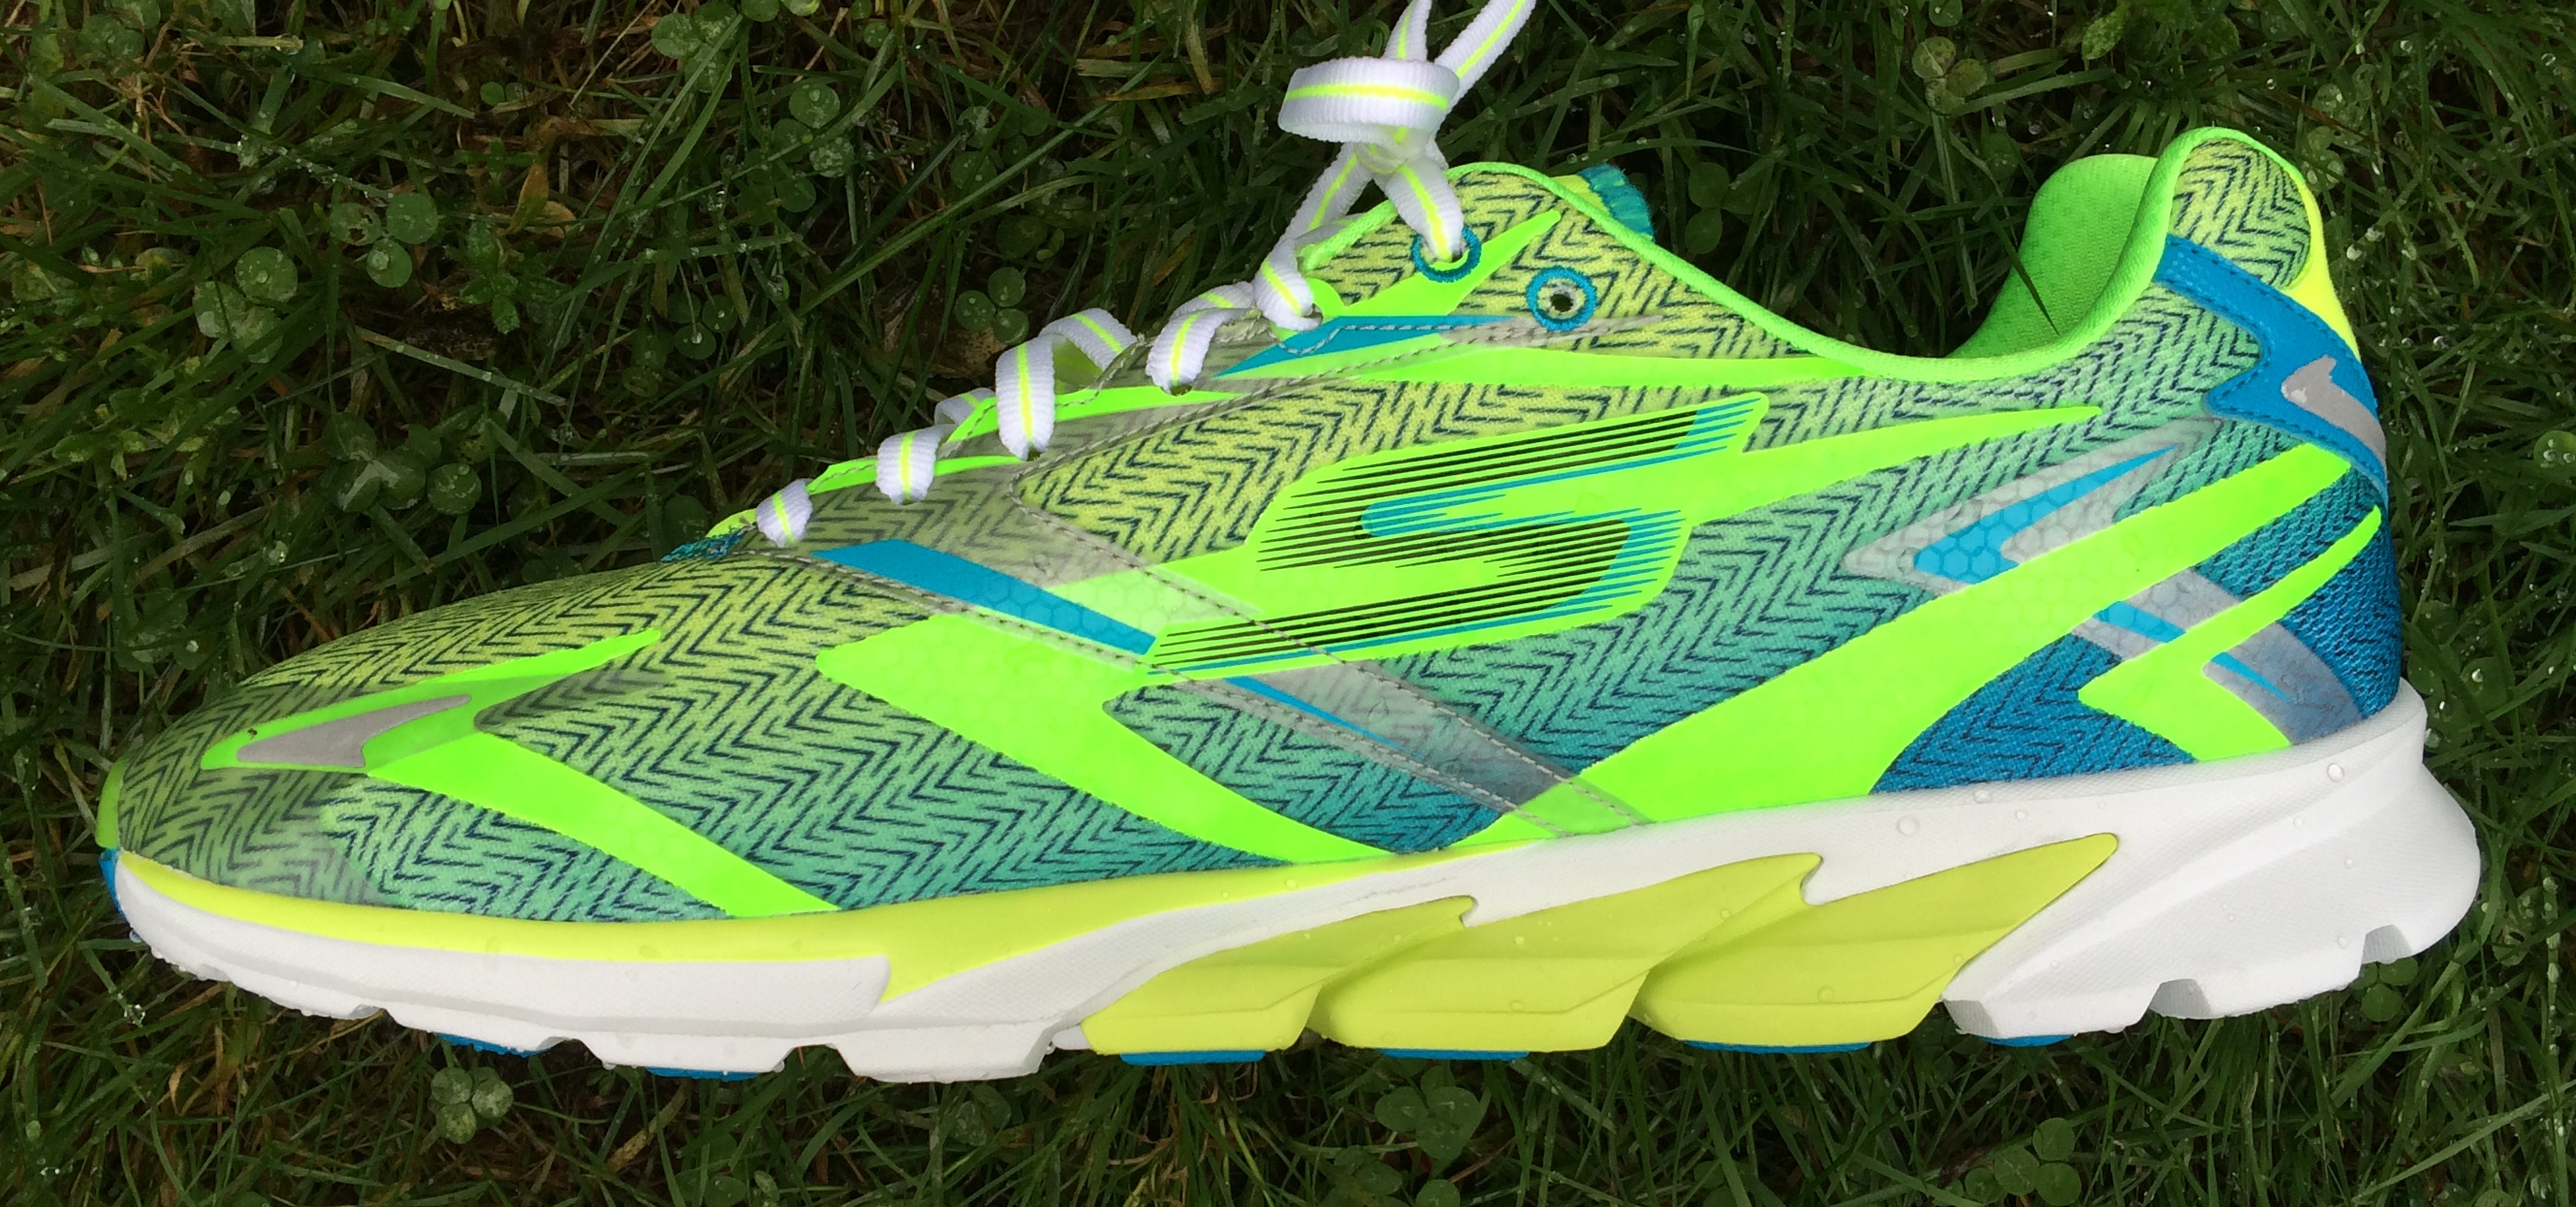 skechers running shoes review 2014